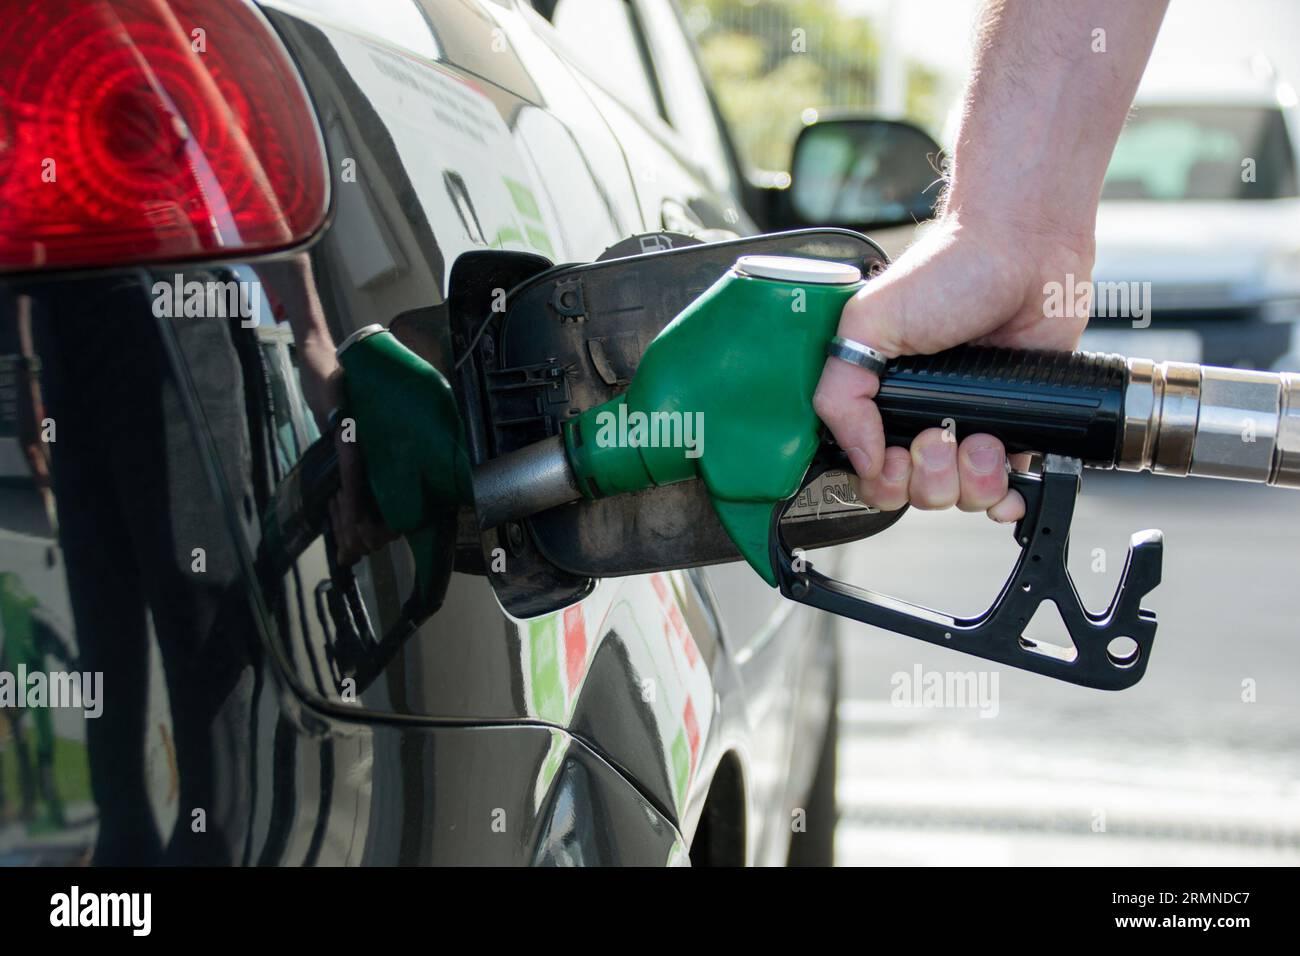 Close-up of the hand of a Caucasian man refueling his car with unleaded fuel Stock Photo